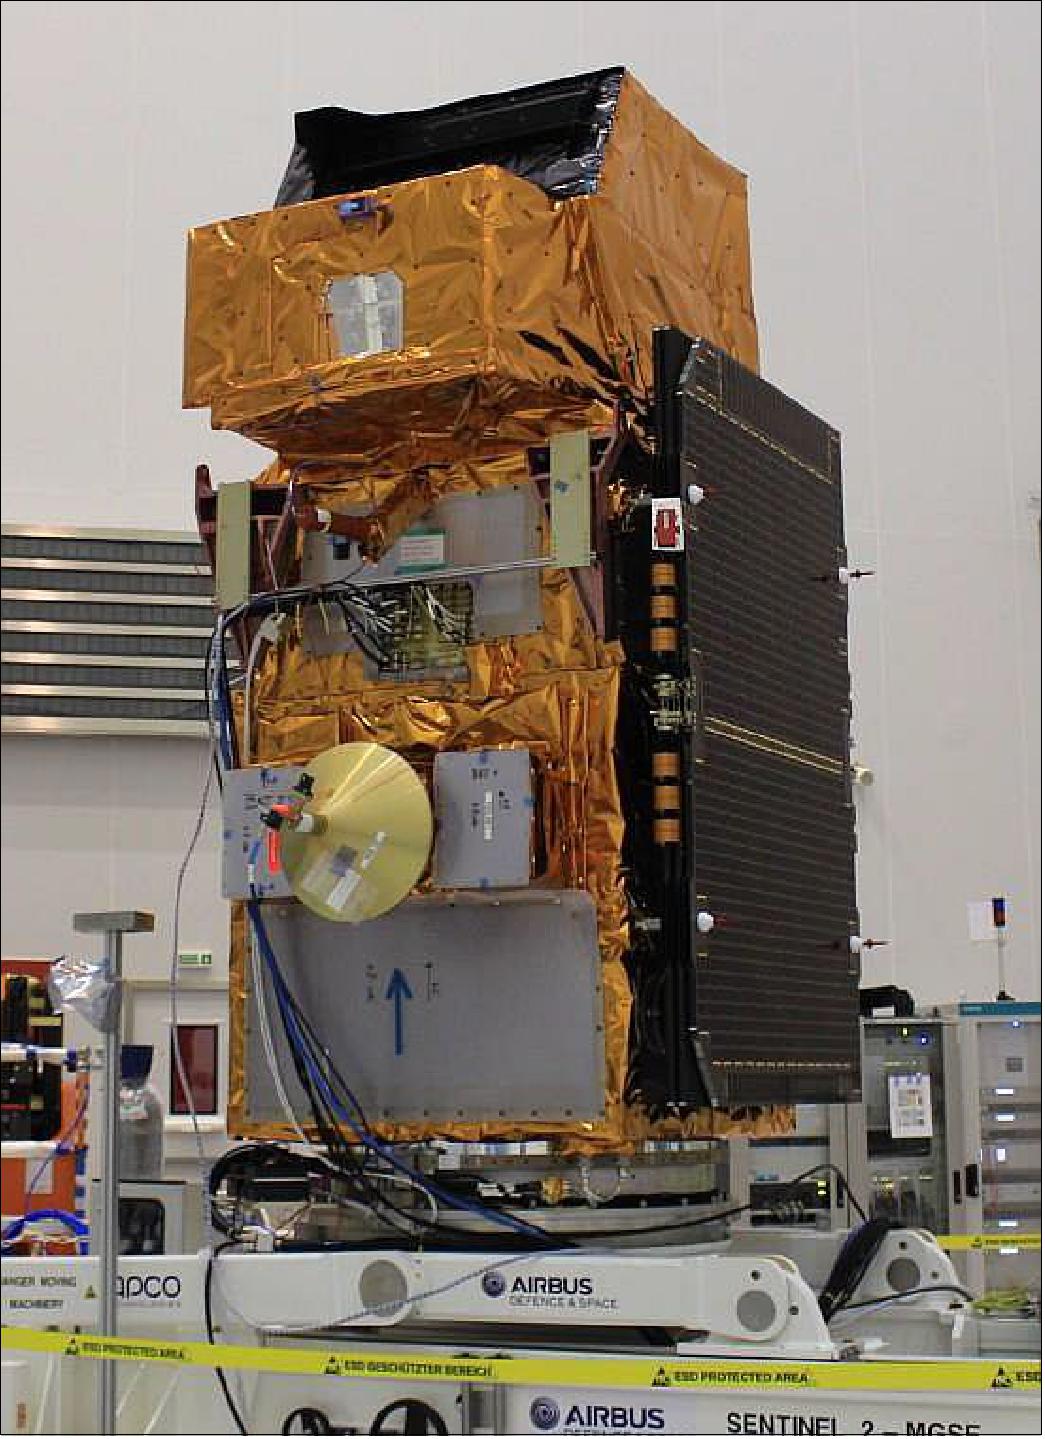 Sentinel-2A is positioned in the Spaceport’s S5 payload processing facility